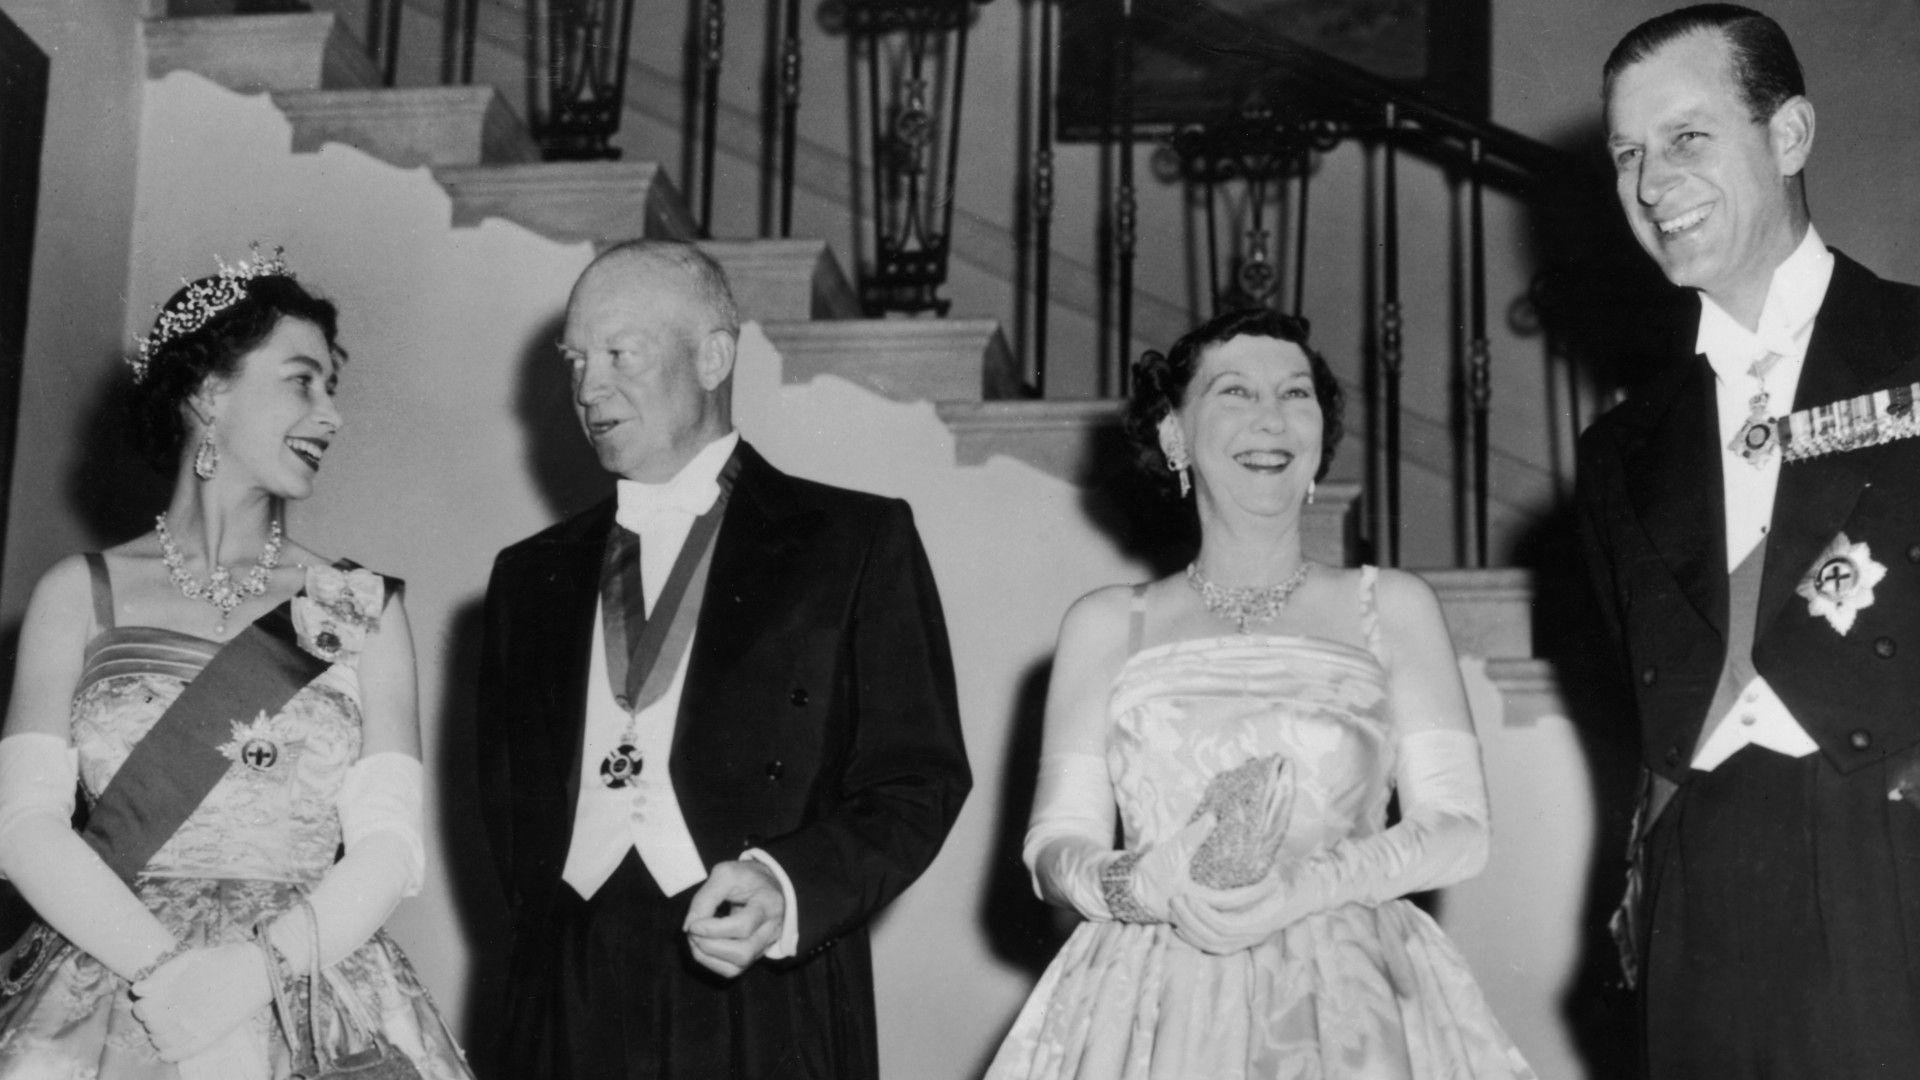 <p>                     In 1957, Elizabeth made her very first trip abroad to the United States as the monarch of the United Kingdom. Though she had been to America before, this was her very first trip as Queen.                   </p>                                      <p>                     During her four-day October visit, she and Prince Philip met the President at the time, Dwight D Eisenhower, at the White House, before making various visits to organisations within Washington DC. She and the Duke of Edinburgh also paid a visit to Williamsburg, Virginia, and New York City, where there was a large parade for the royals on the streets.                   </p>                                      <p>                     This wasn’t the President and Elizabeth’s first meeting, however. President Eisenhower had actually met Elizabeth as a young girl – back when she was Princess Elizabeth – during a meeting with her father King George.                   </p>